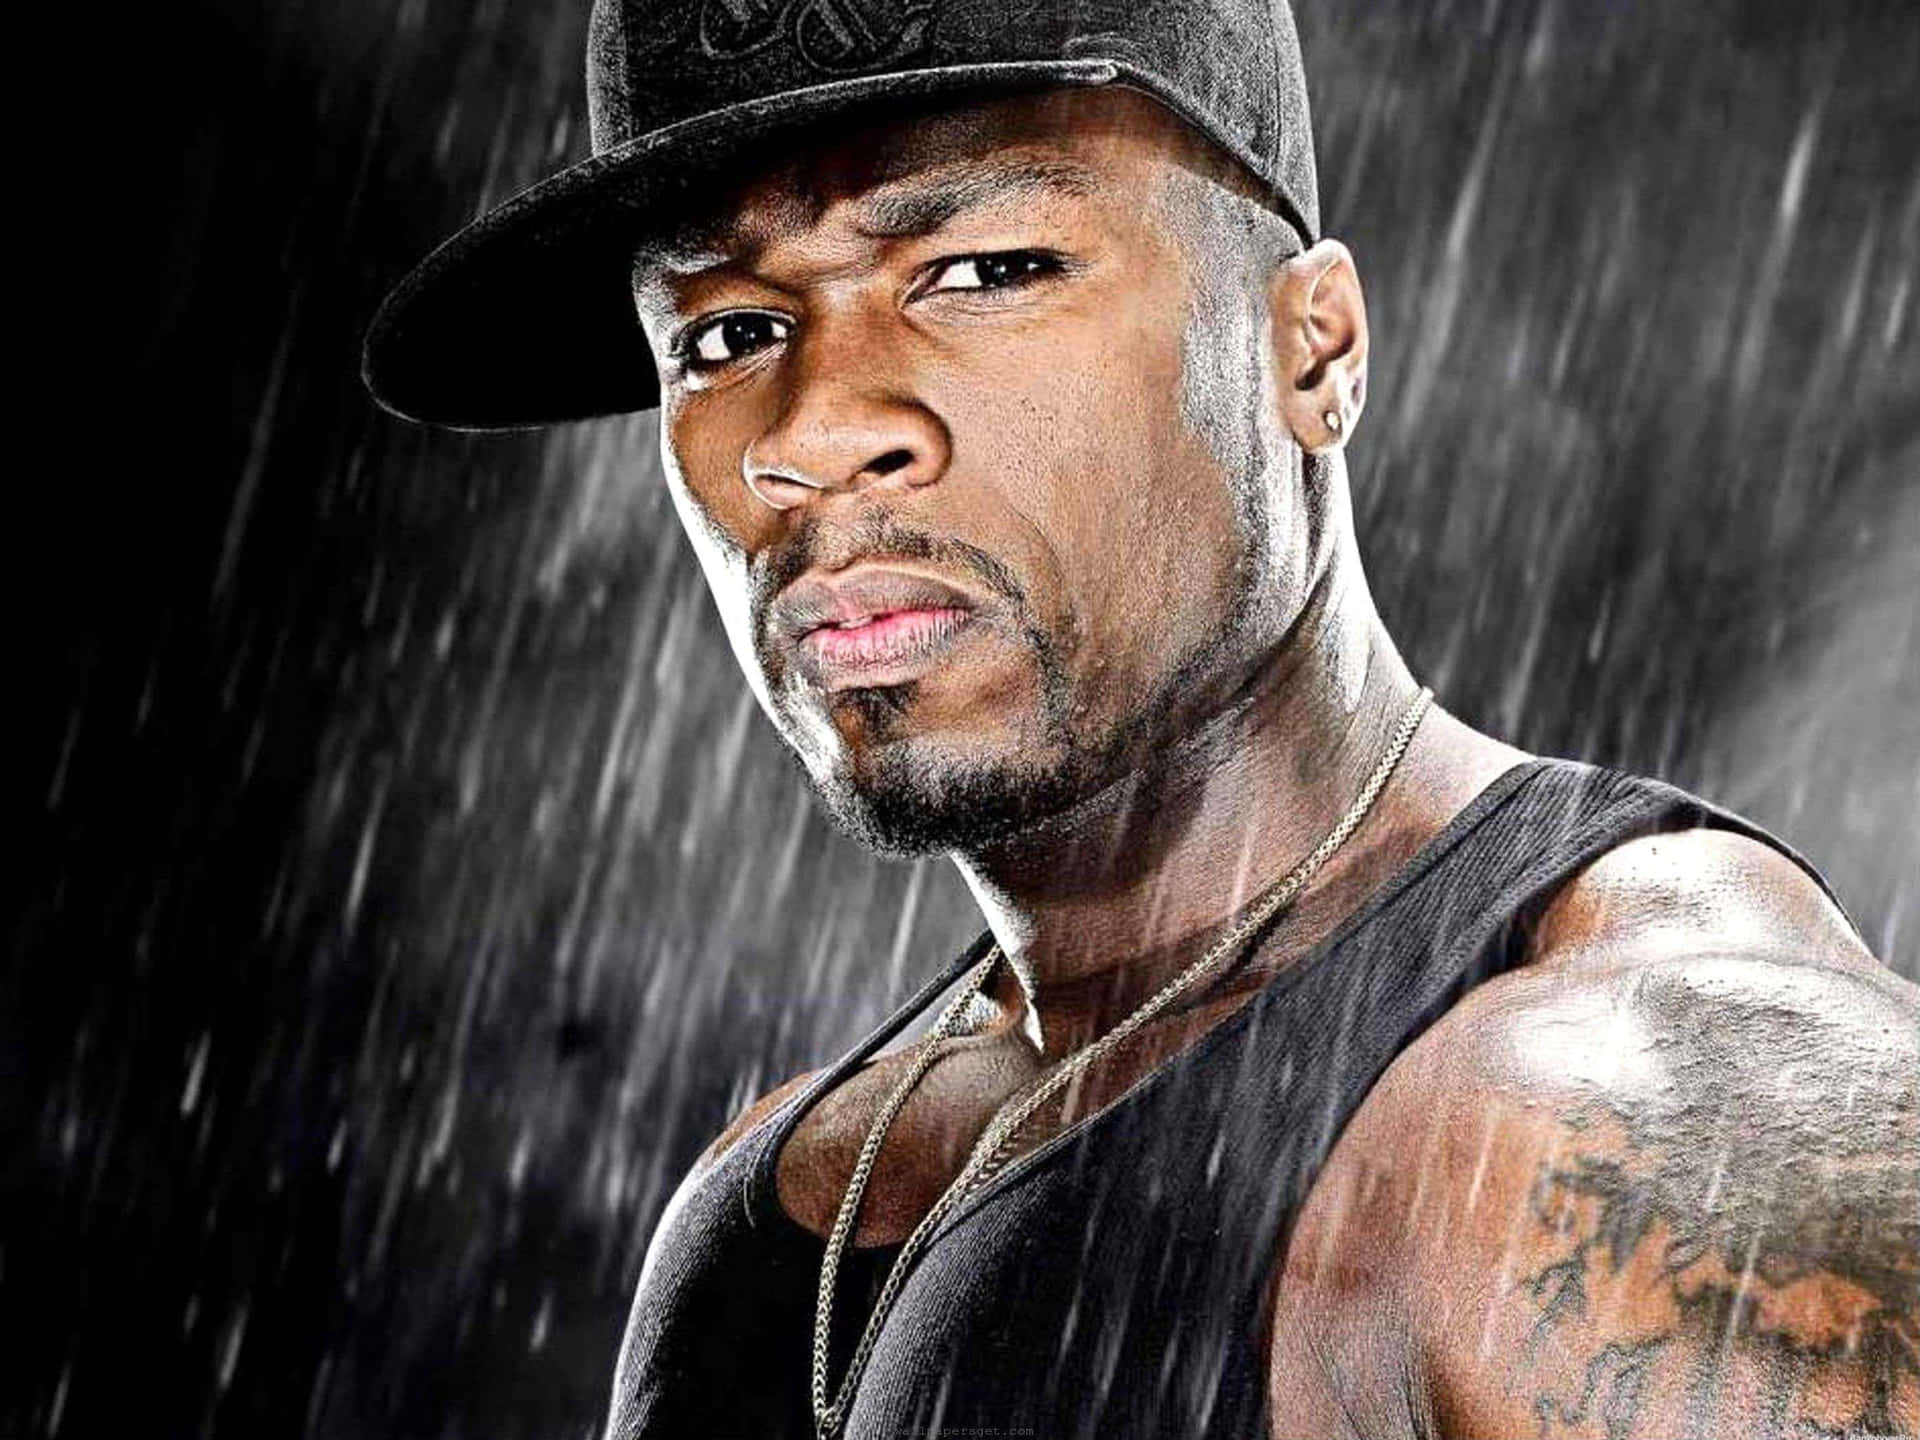 50 Cent - One of the Greatest Hip-Hop Stars of All Time